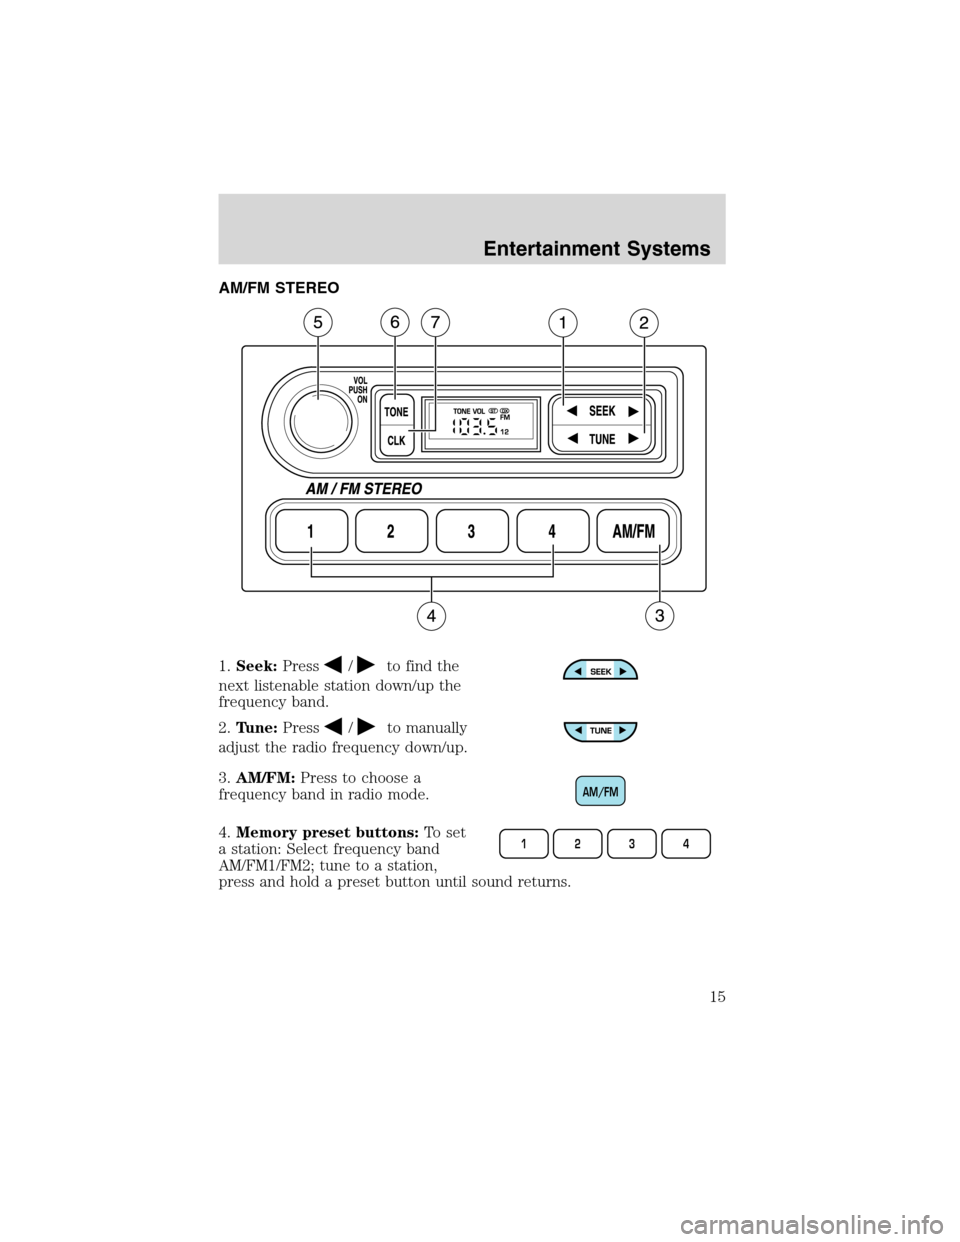 FORD E SERIES 2003 4.G User Guide AM/FM STEREO
1.Seek:Press
/to find the
next listenable station down/up the
frequency band.
2.Tune:Press
/to manually
adjust the radio frequency down/up.
3.AM/FM:Press to choose a
frequency band in rad